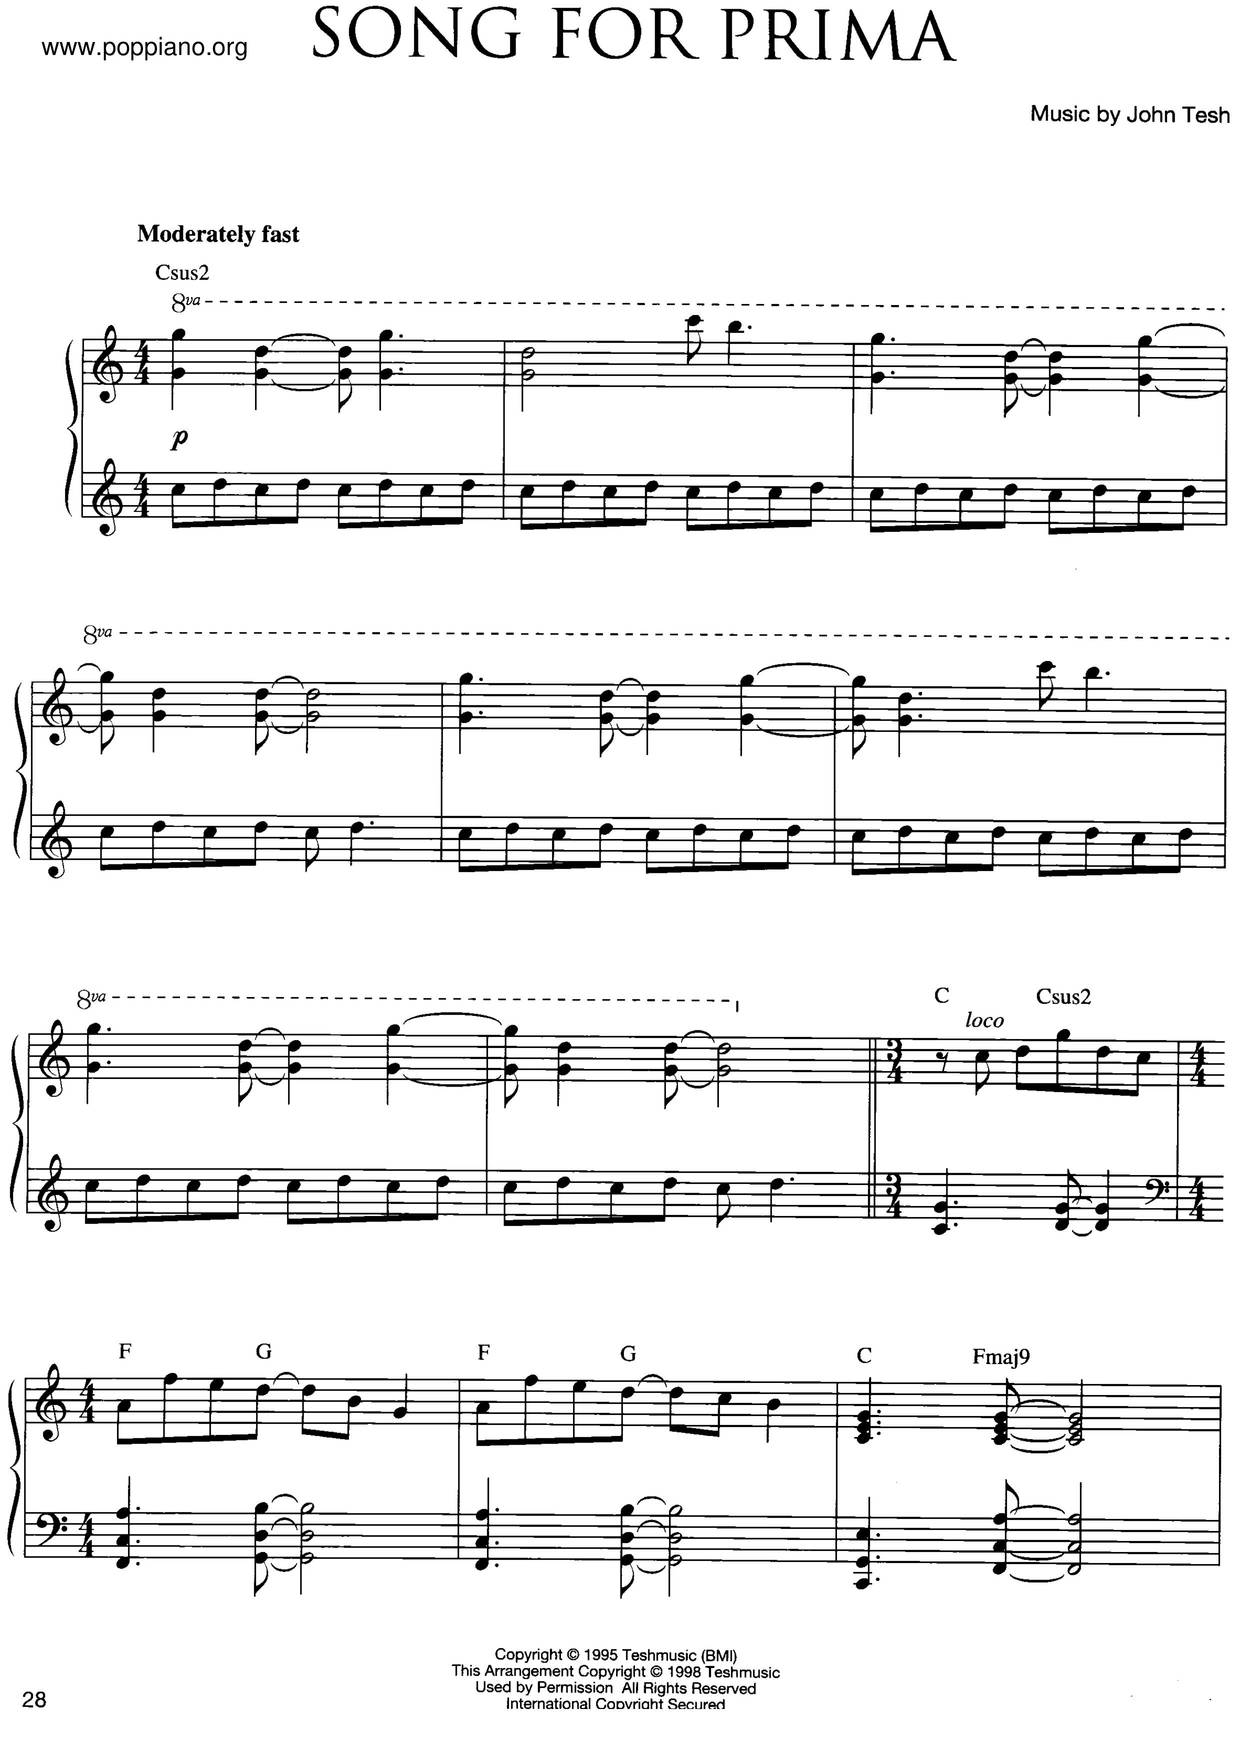 Song For Prima Score